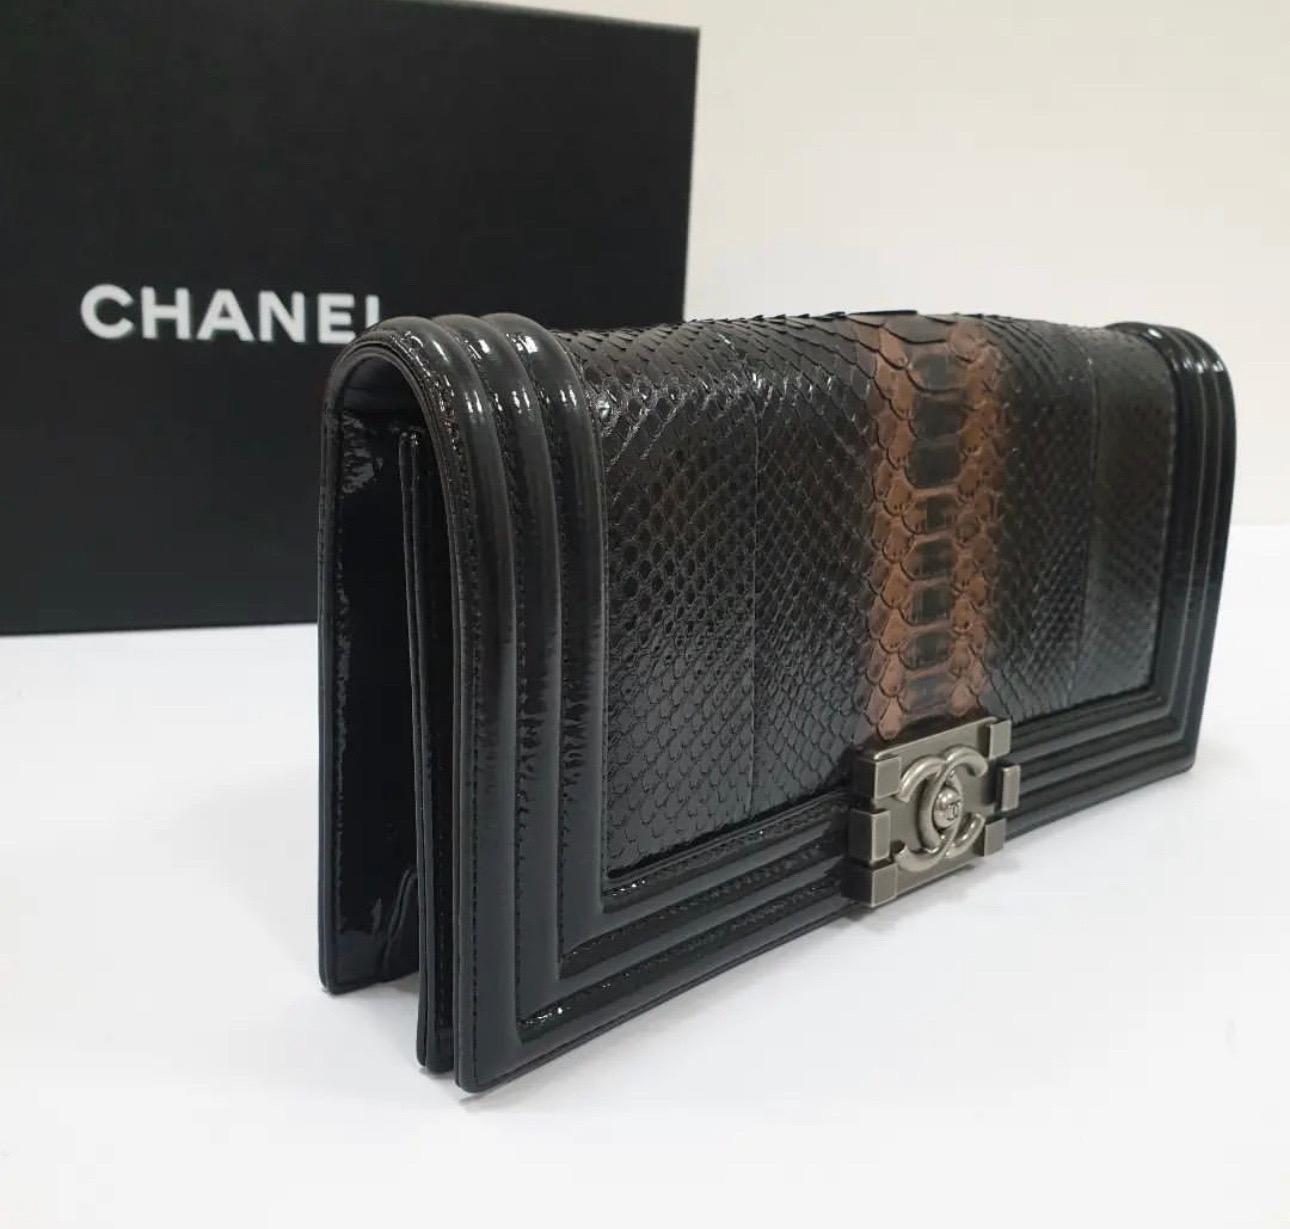 Rare Chanel Python Patent Boy Clutch

Linear-quilted Leather Frame

Gun-metal Square CC Press Lock

Black Leather Interior

Single Interior Flat Pocket

25*12.5*5 cm

Very good condition.

Signs of wear only under flap

No box. No dust bag.
